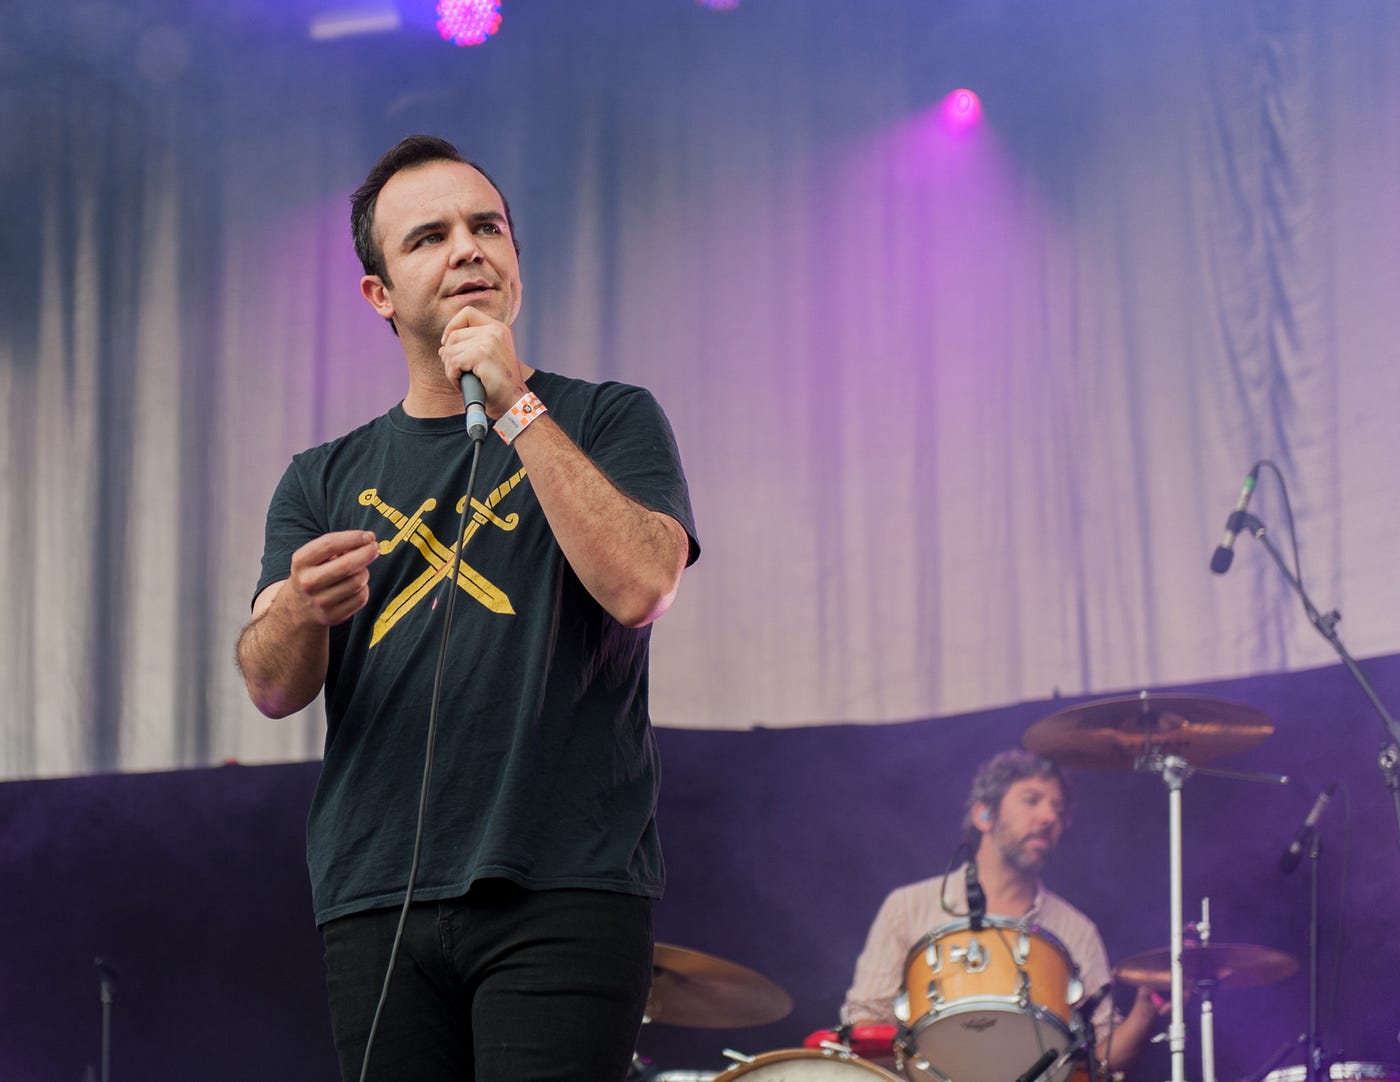 Future Islands, 'King Of Sweden' — Single Review, by IZILION